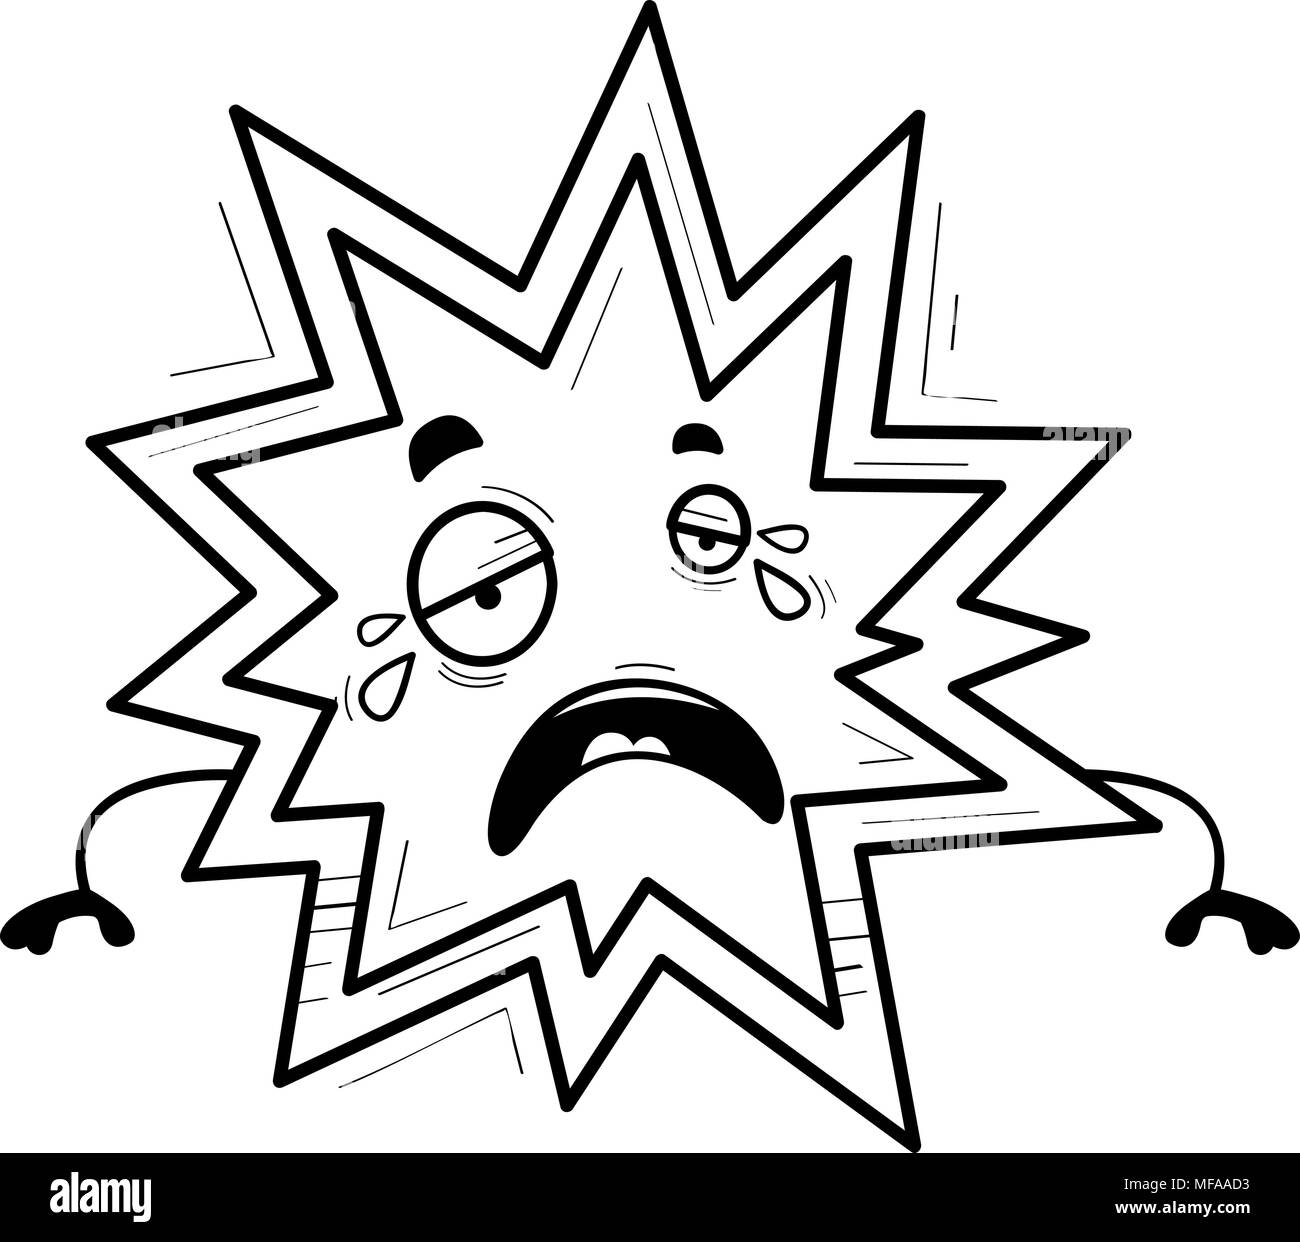 A cartoon illustration of an explosion crying. Stock Vector